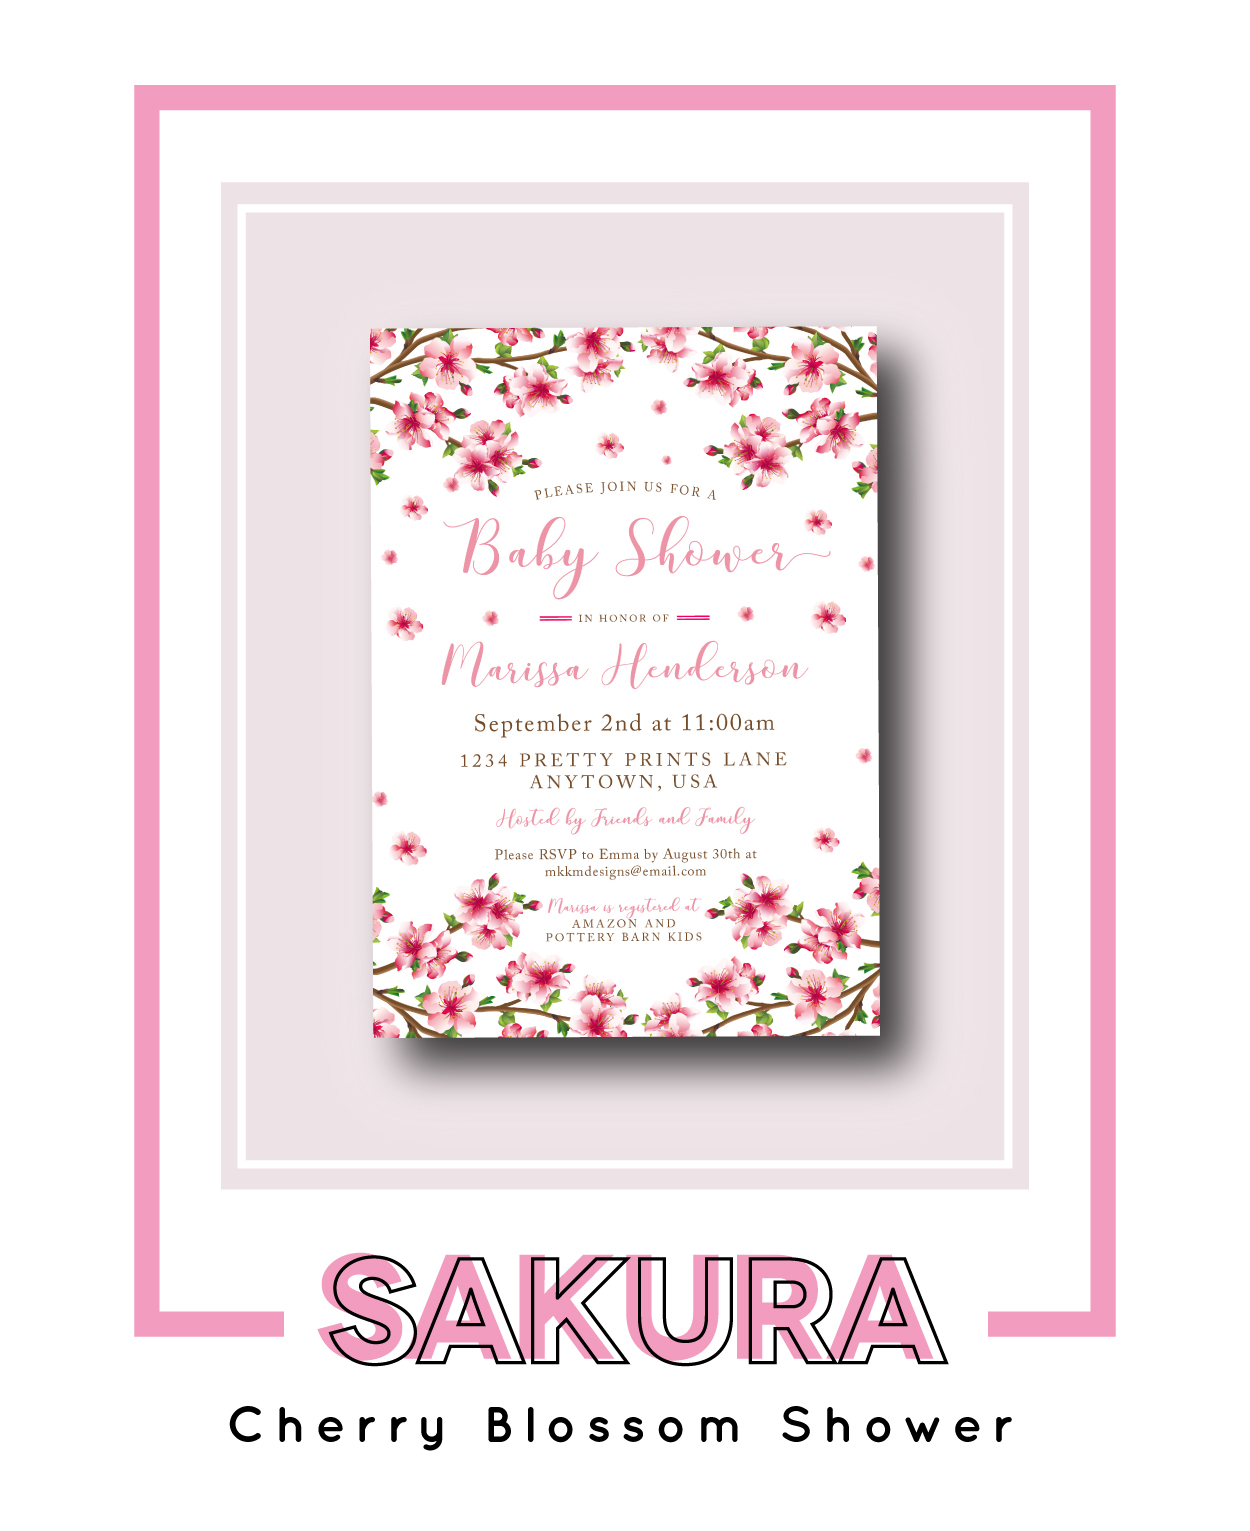 Sakura, a spring baby shower theme with cherry blossom's and soft details // mkkmdesigns